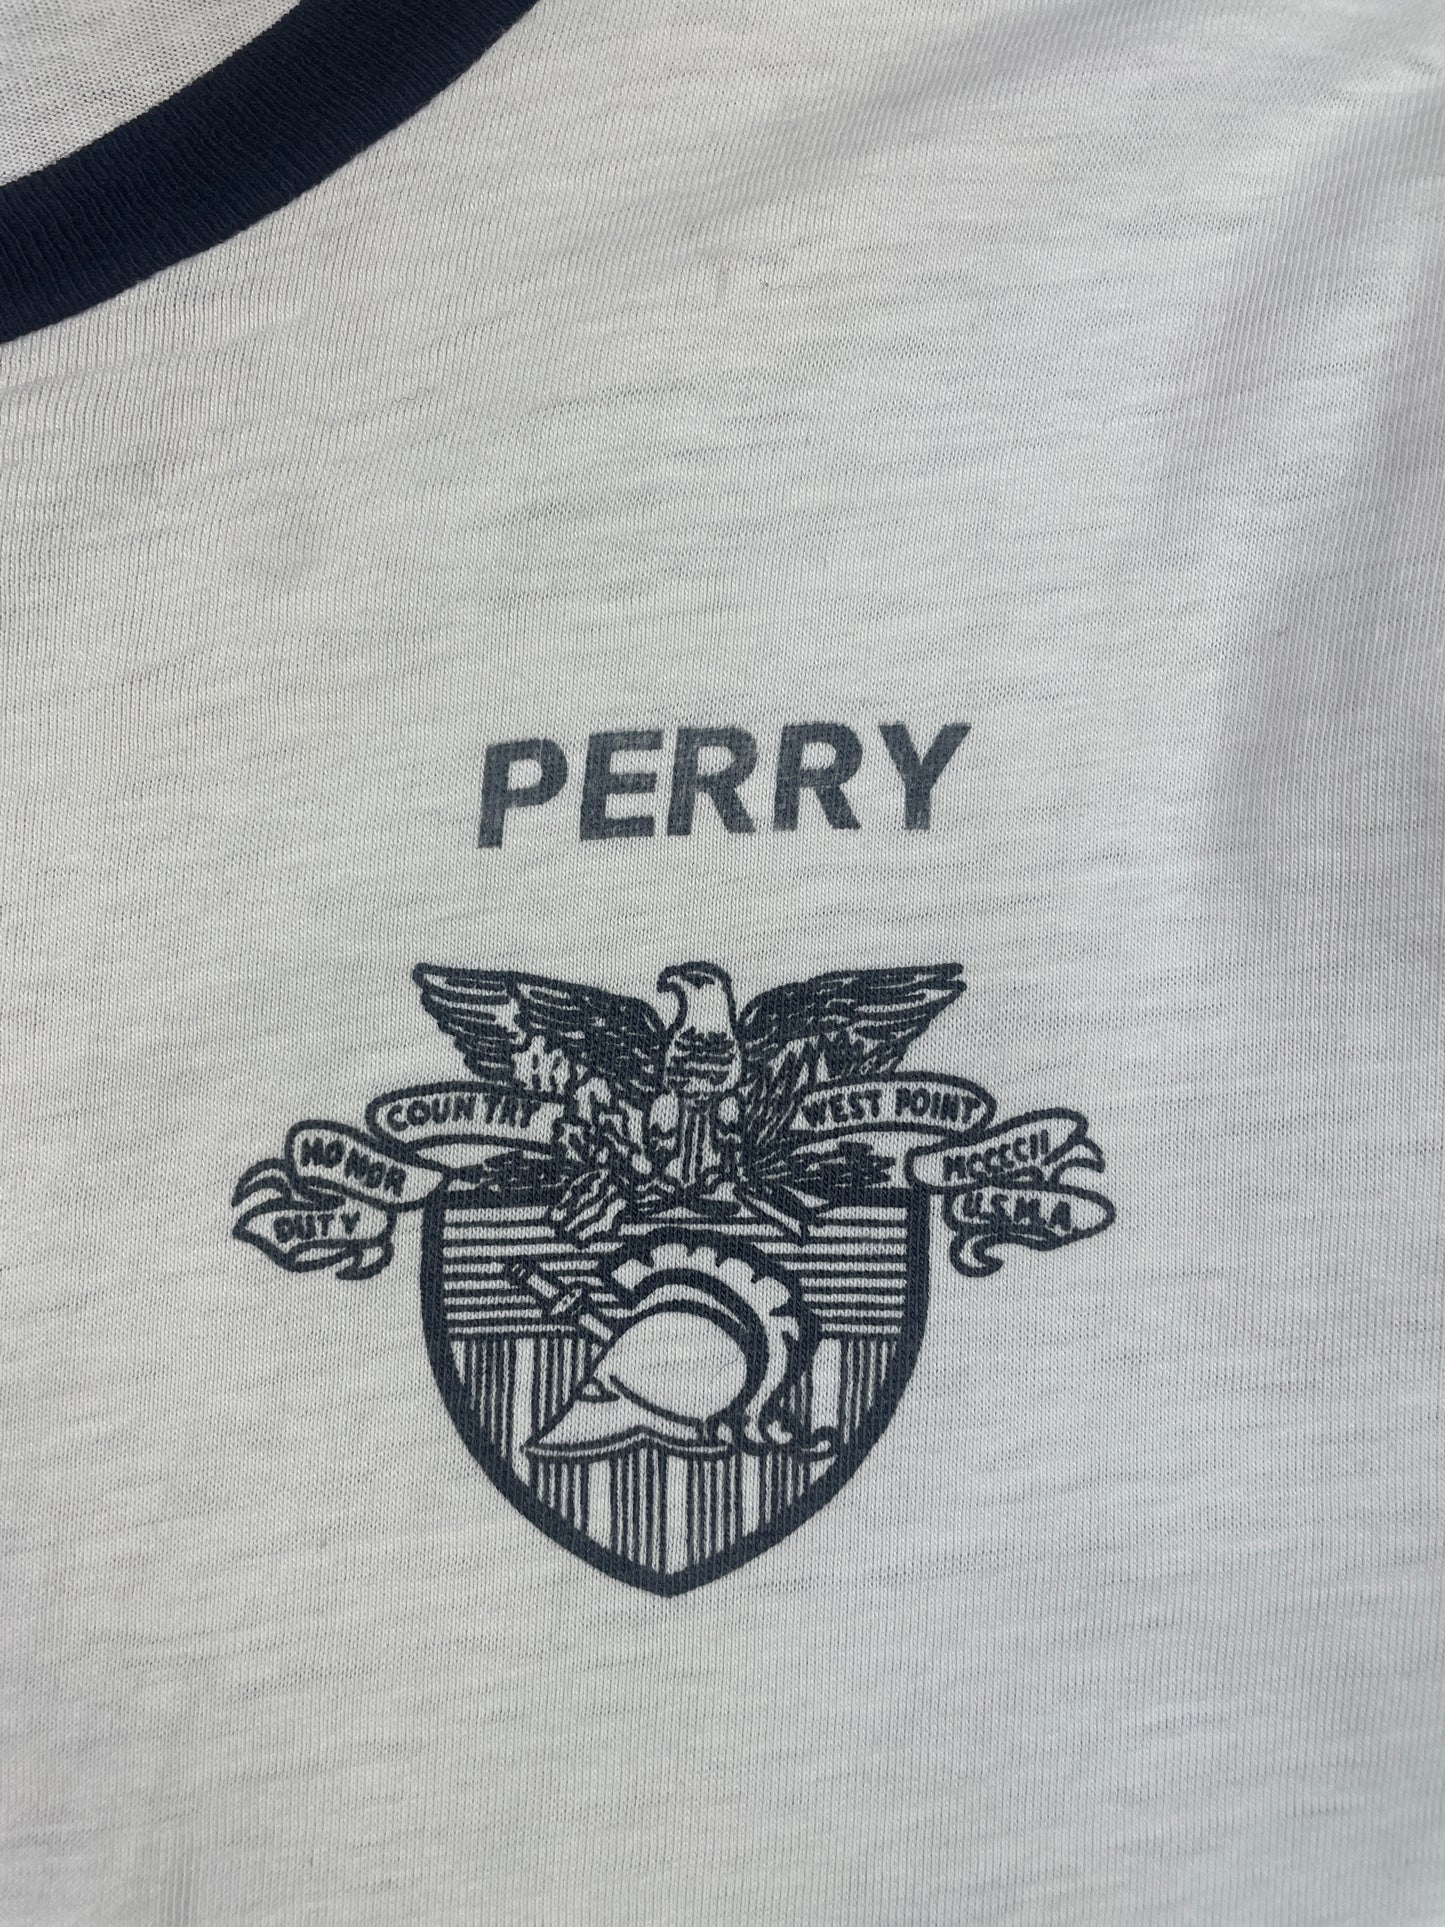 60s Champion West Point Academy "Perry" T-Shirt // 40